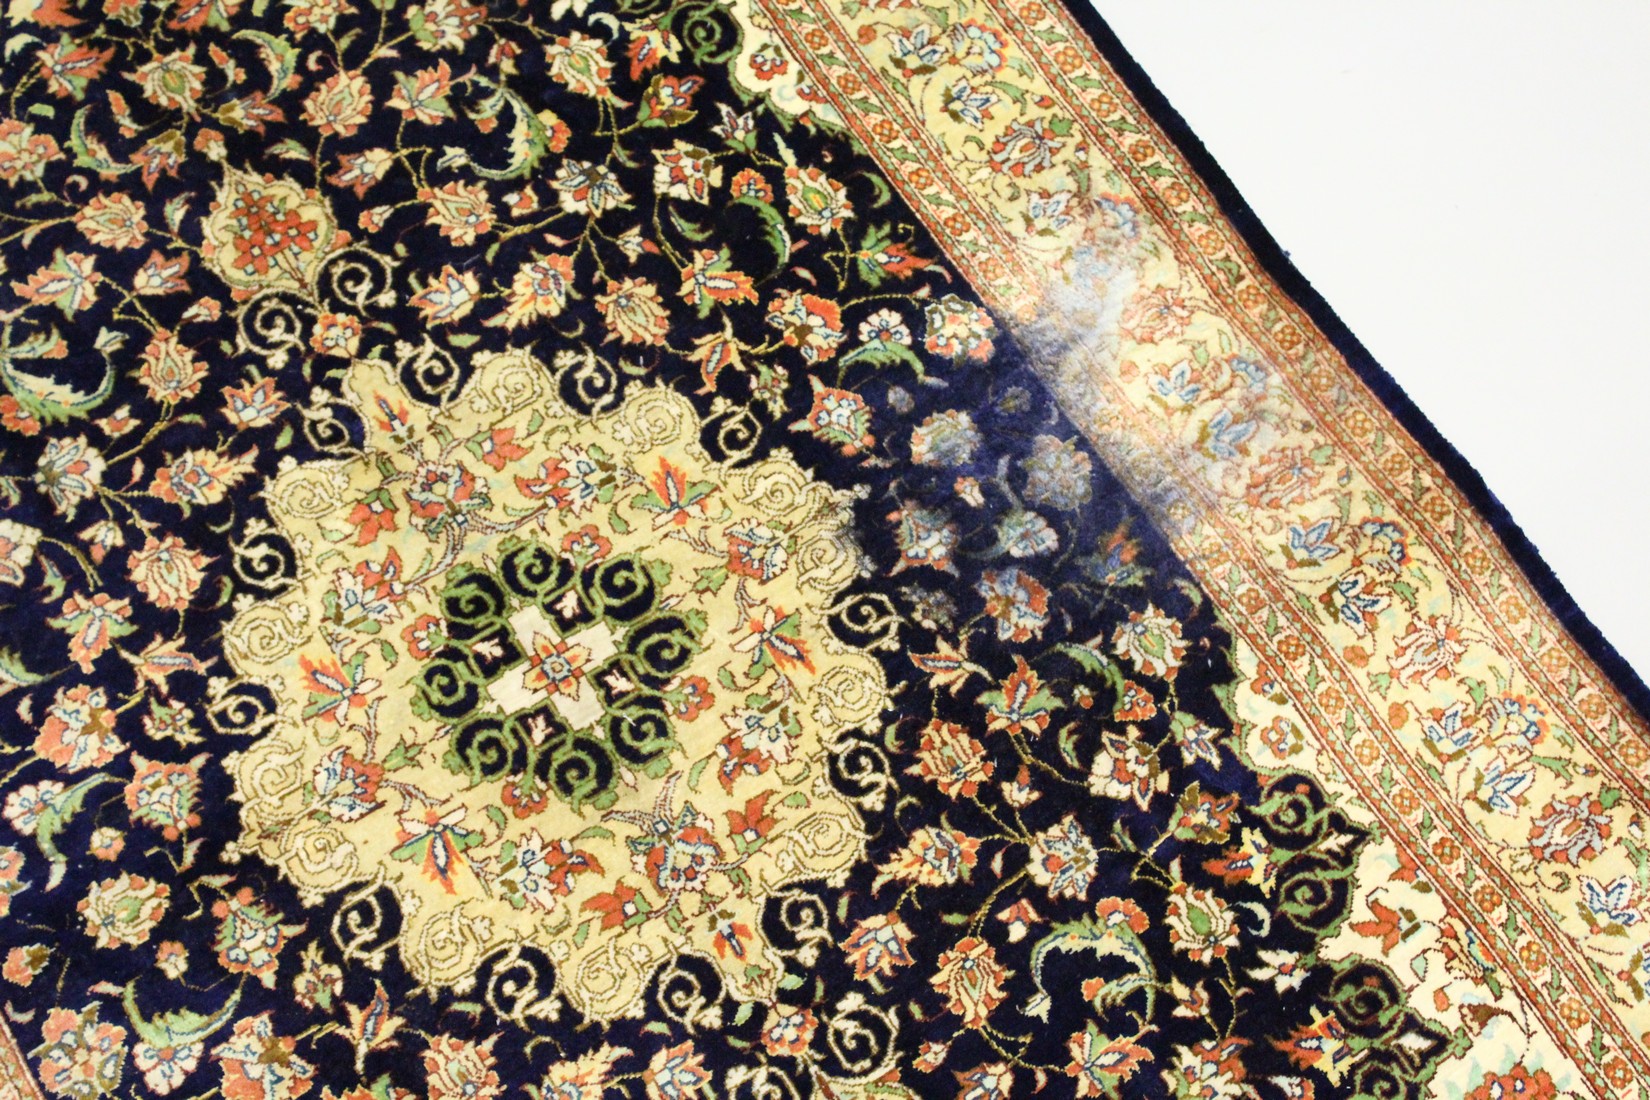 A PERSIAN SILK QUOM RUG, blue ground with all over floral decoration. 4ft 10ins x 3ft 1ins. - Image 2 of 6